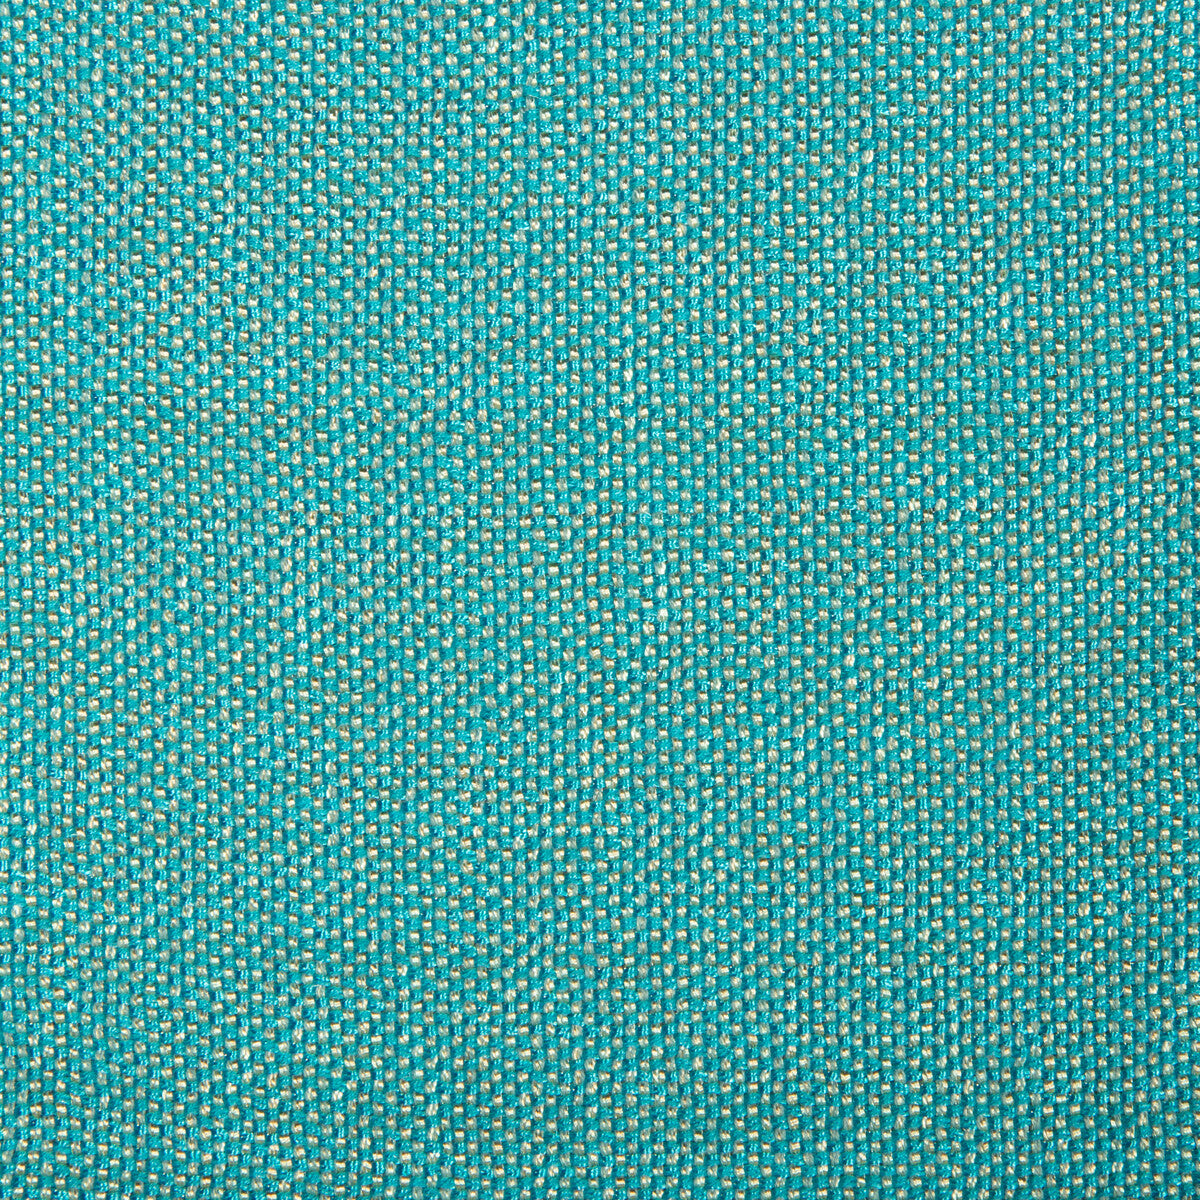 Kravet Contract fabric in 34926-113 color - pattern 34926.113.0 - by Kravet Contract